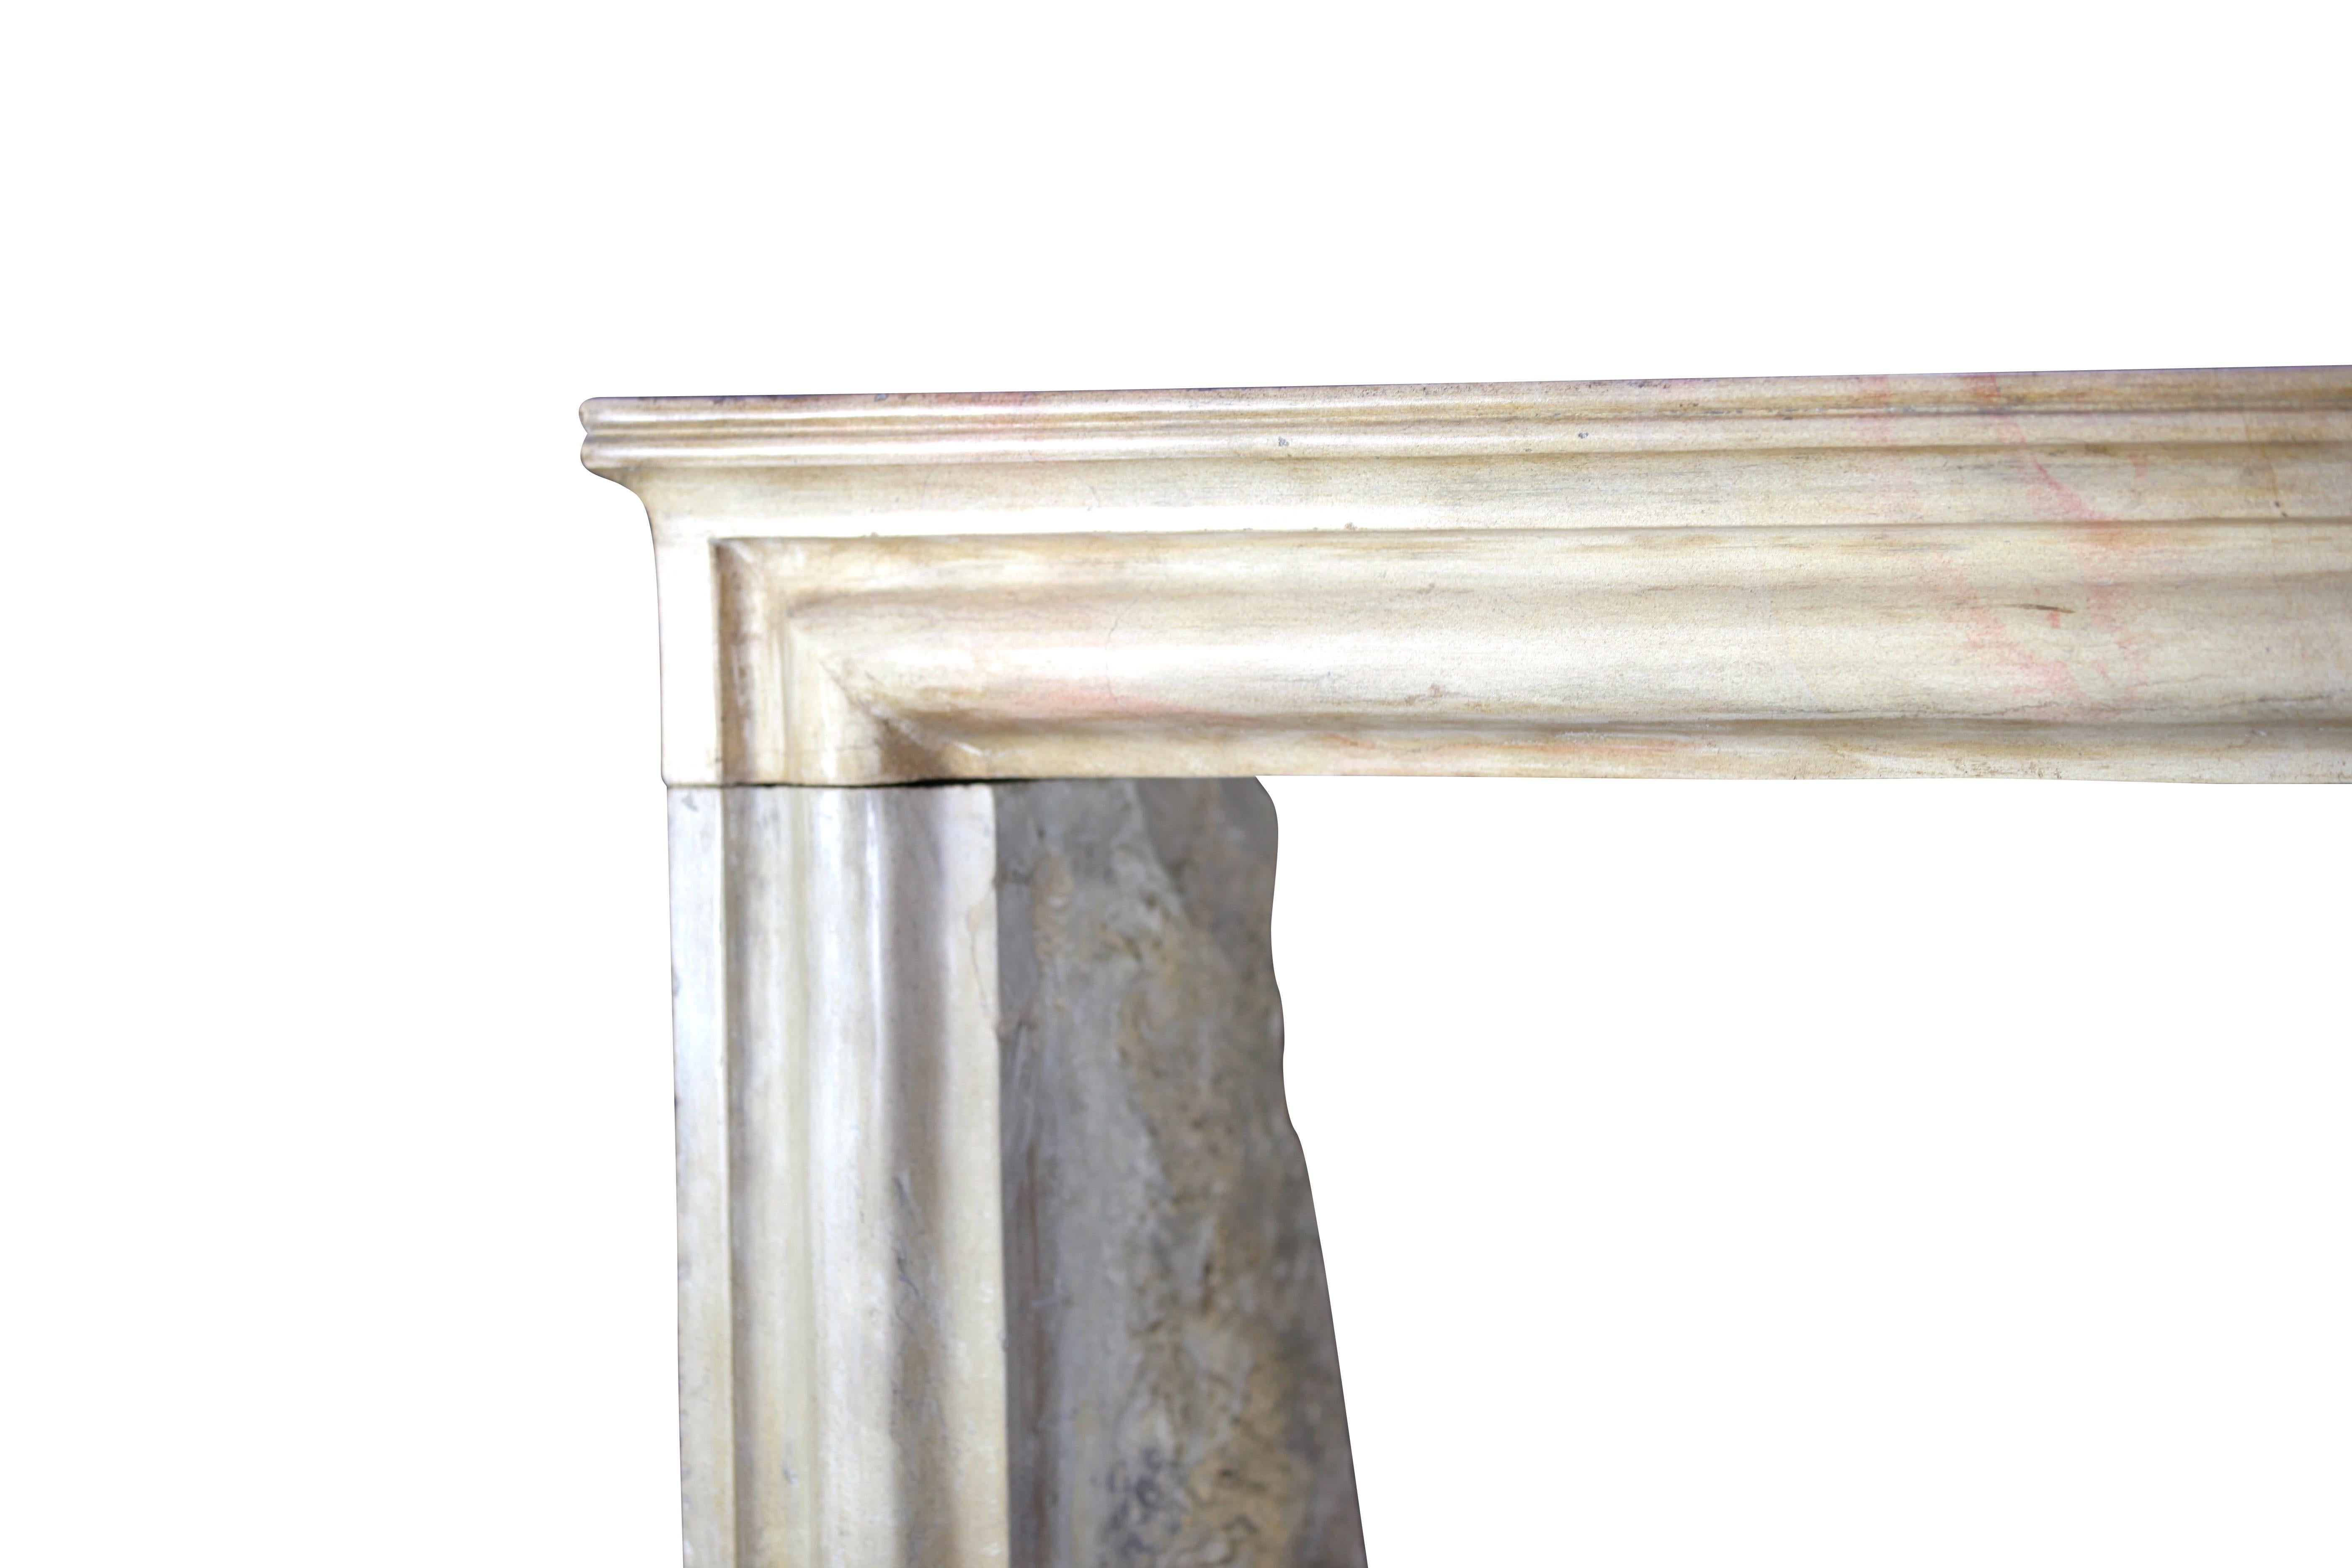 A French timeless Louis XIV style vintage fireplace surround from the 19th century. It is made in a honey color Burgundy hard stone/marble which has been polished.
Measures:
113 cm exterior width 44.49 inch
105 cm exterior height 41.33 inch
89